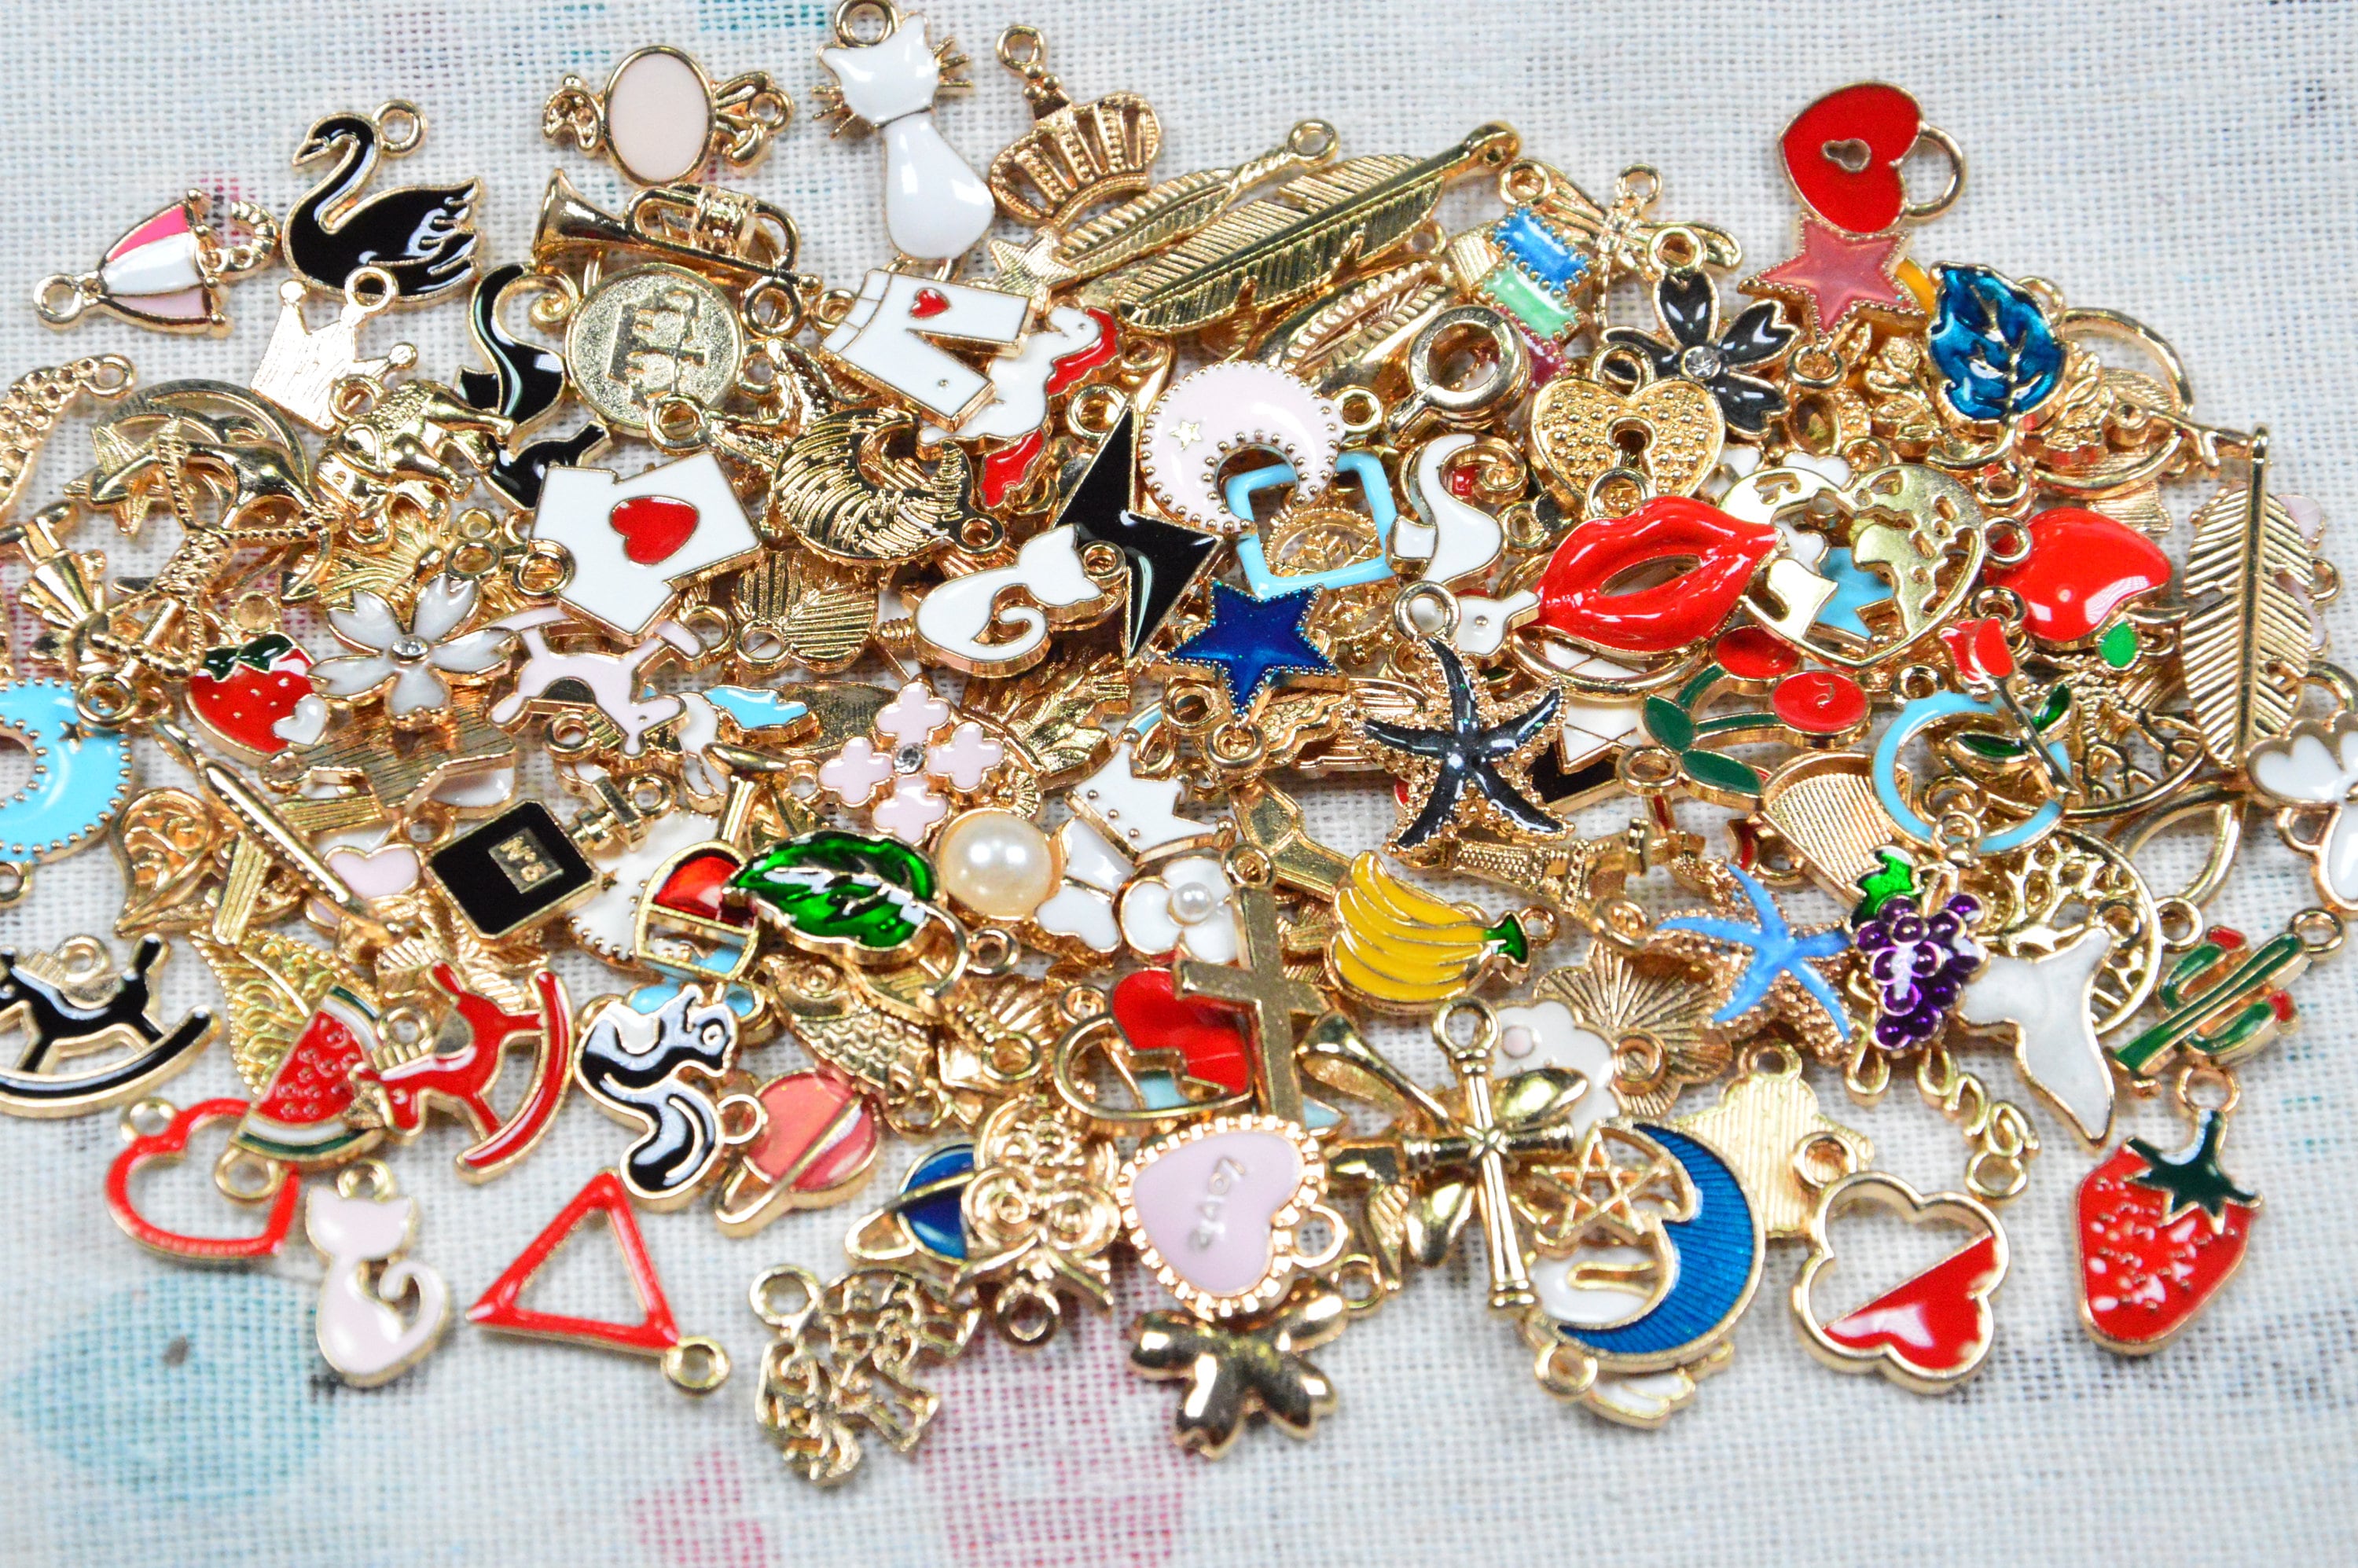 400pcs Charms for Jewelry Making, Assorted Enamel Bracelet Bangle Charms, Mixed Bulk Metal Necklace Earring Charm for Jewelry Making